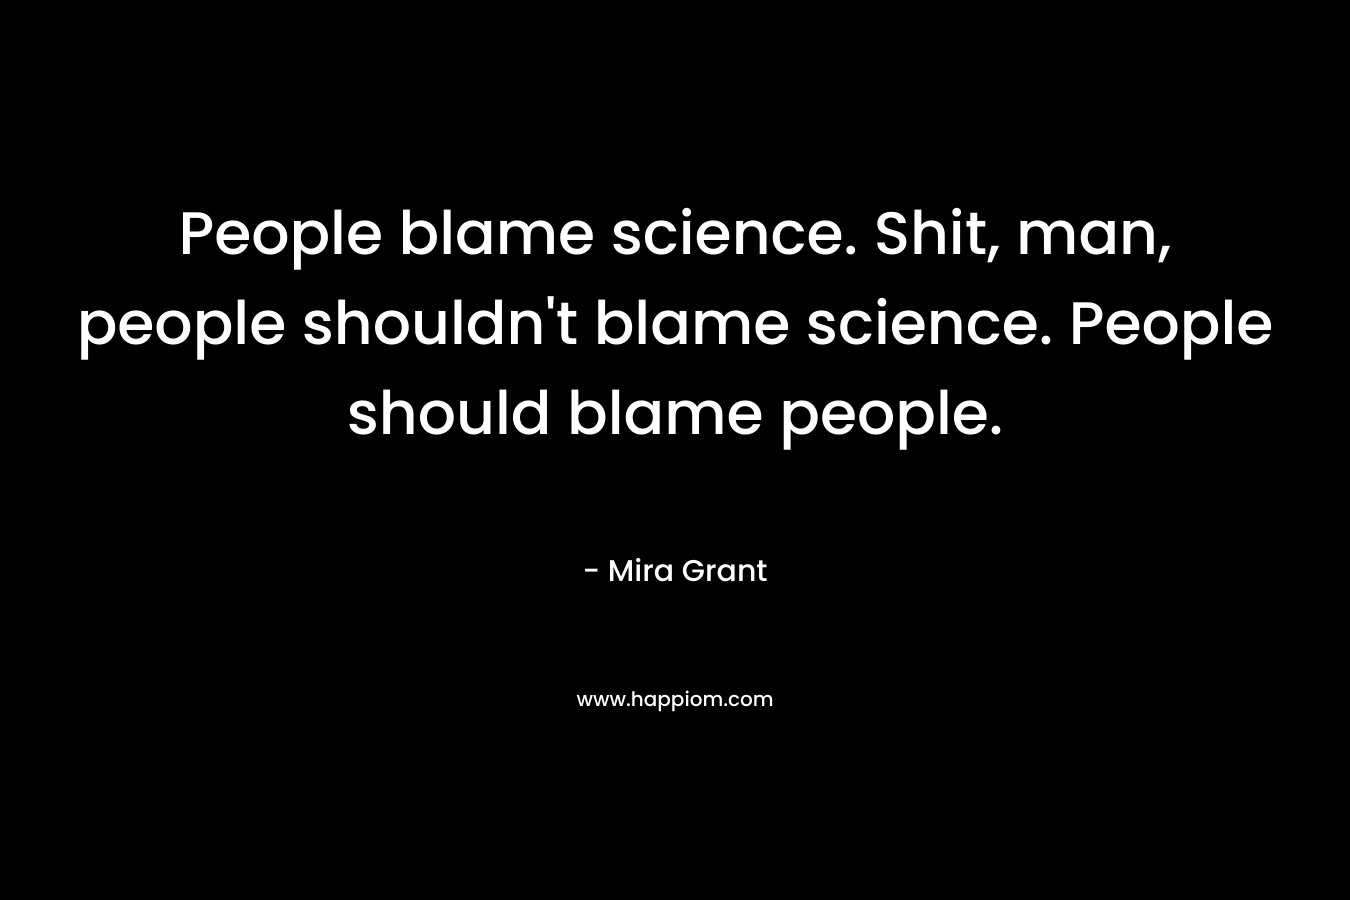 People blame science. Shit, man, people shouldn’t blame science. People should blame people. – Mira Grant